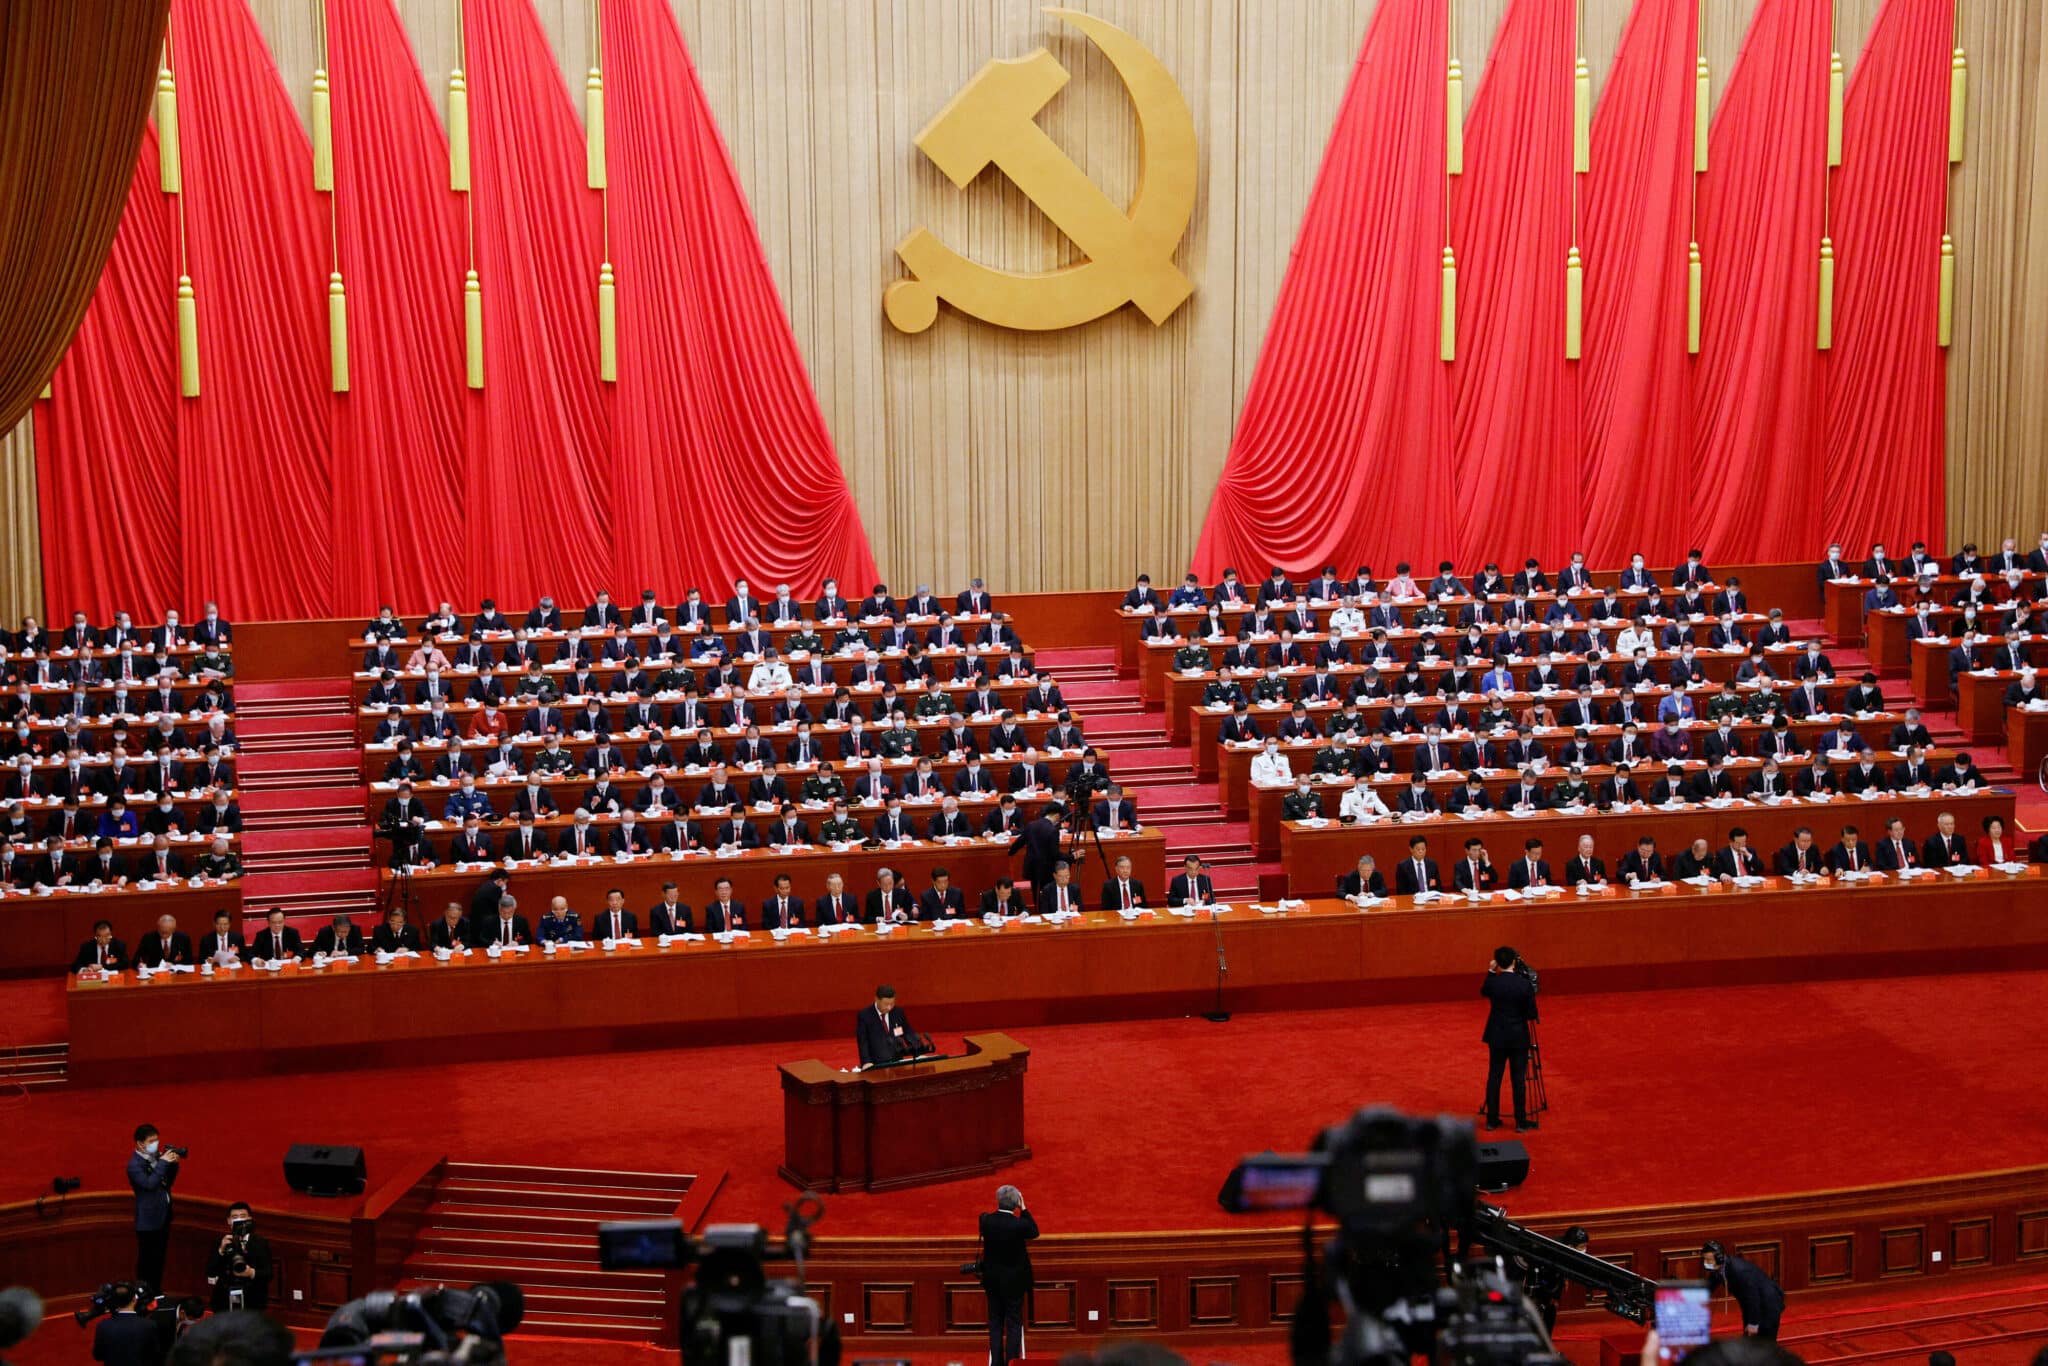 Chinese President Xi Jinping speaks during the opening ceremony of the 20th National Congress of the Communist Party of China, at the Great Hall of the People in Beijing, China October 16, 2022. Photo: Reuters/Thomas Peter.